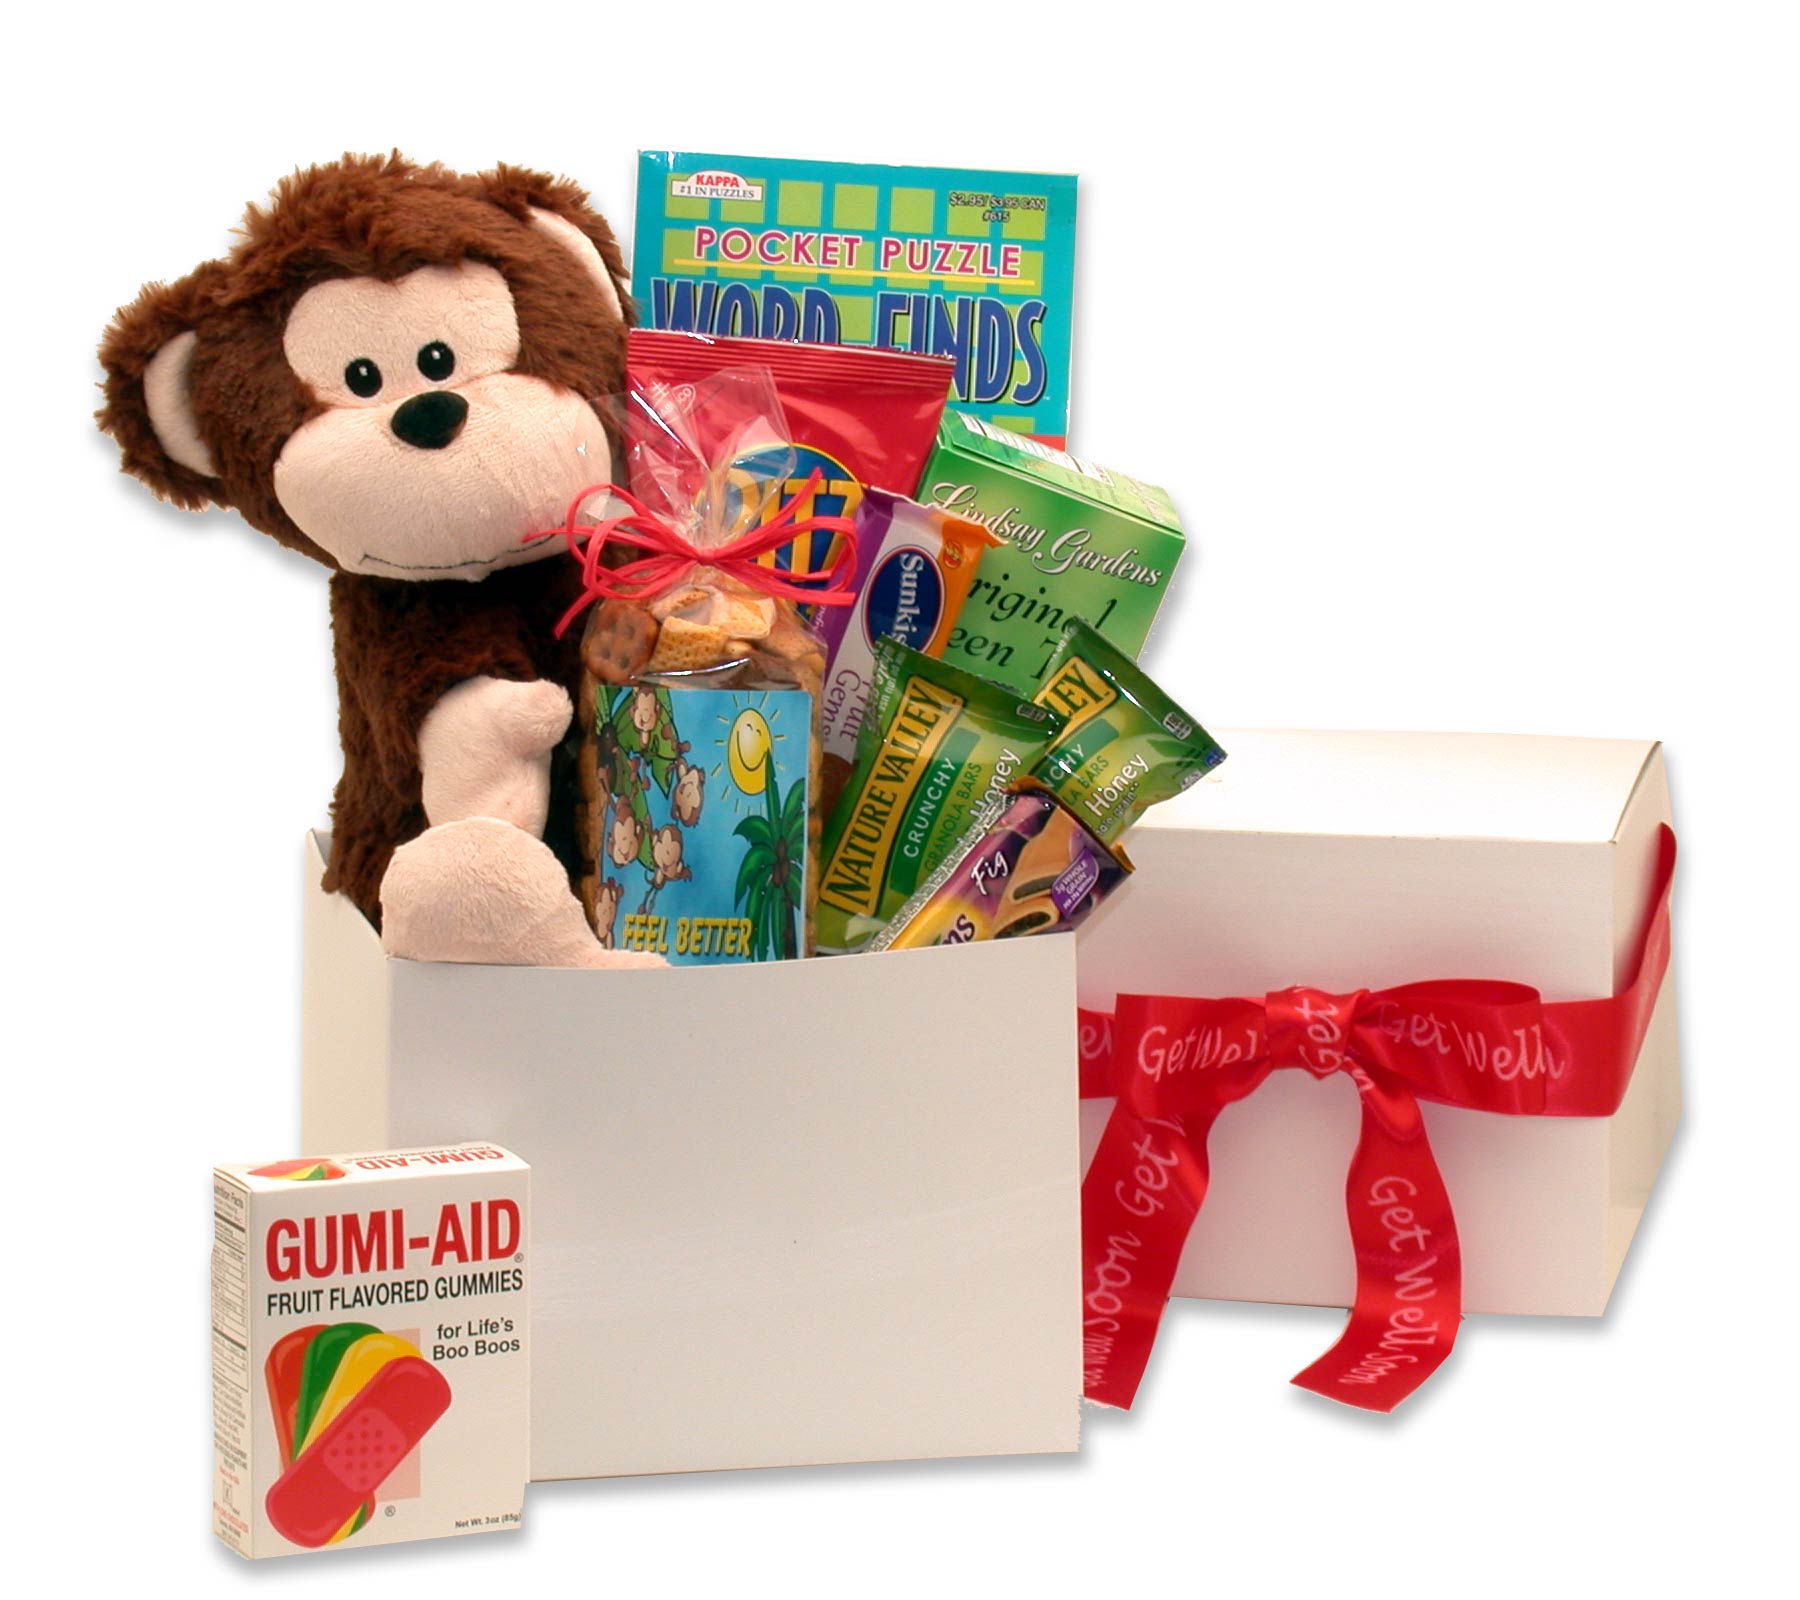 Hang In There Get Well Care Package - Sick care Package - Get well care package for sick friend